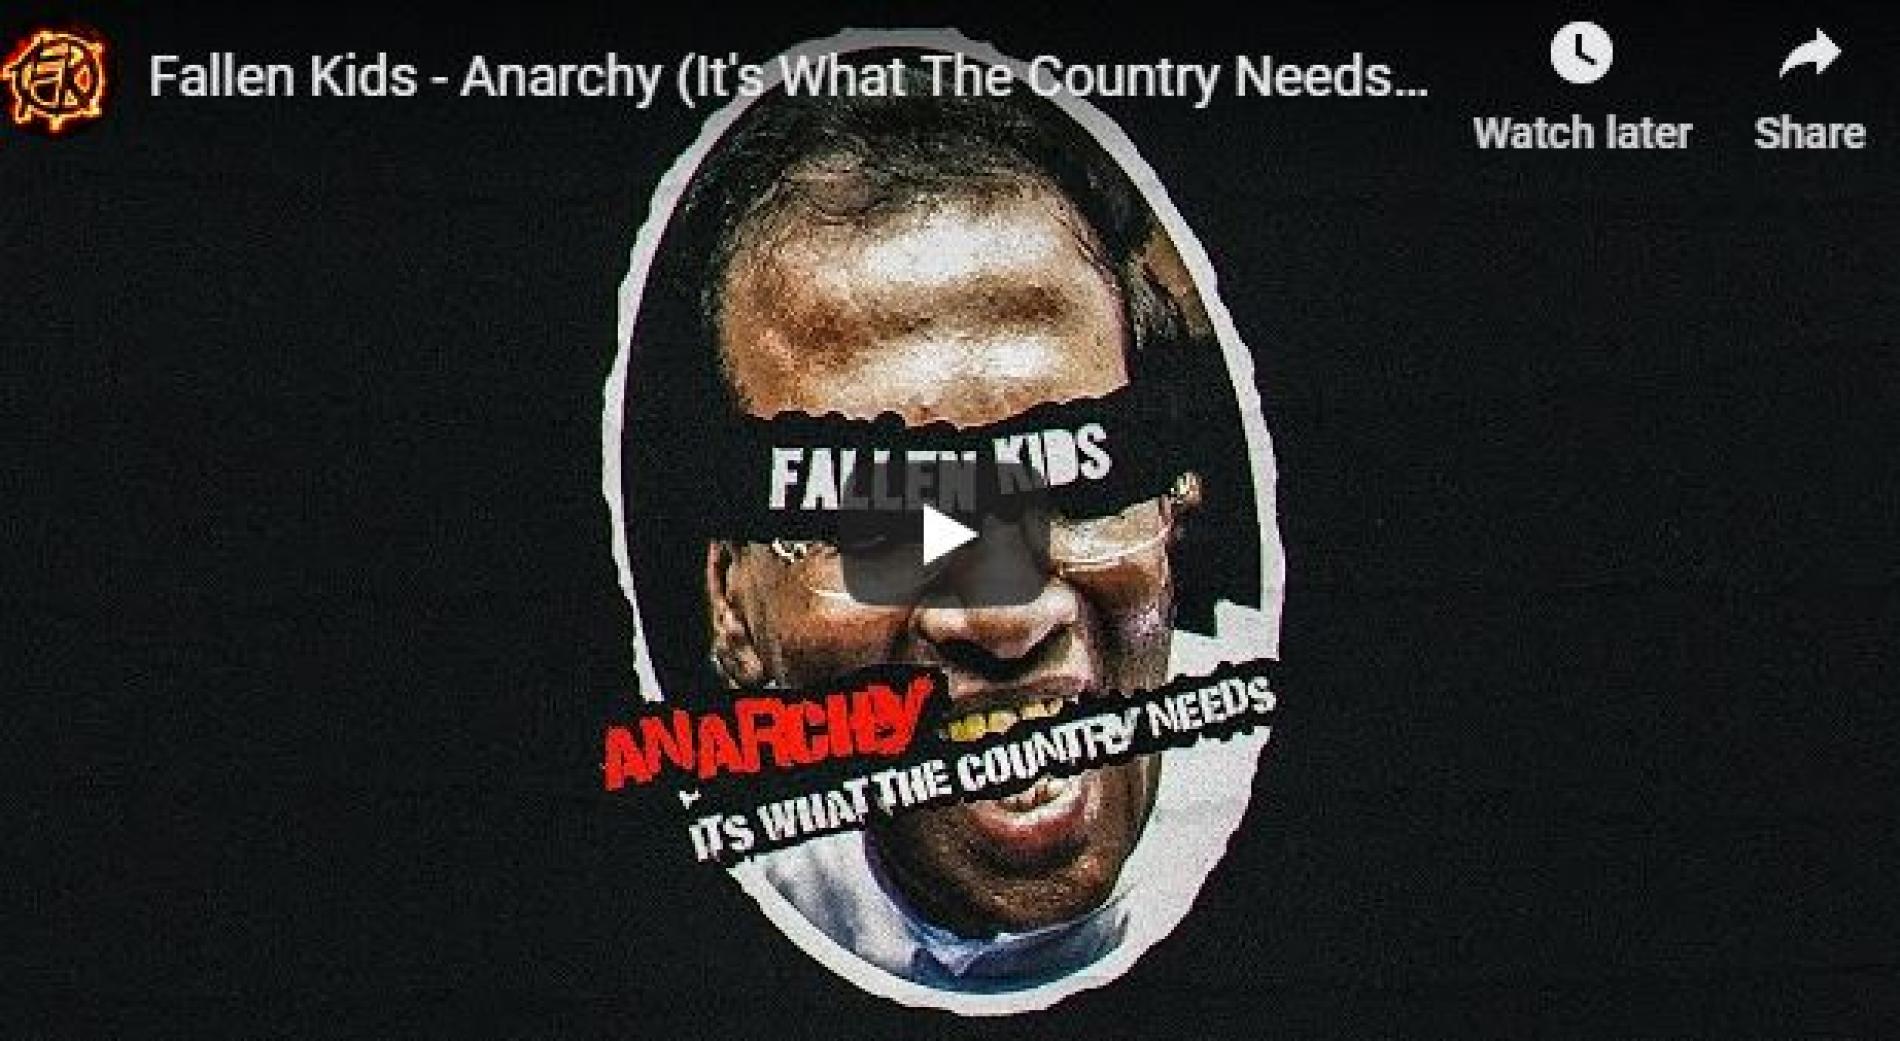 Fallen Kids – Anarchy (It’s What The Country Needs) Lyrics Video